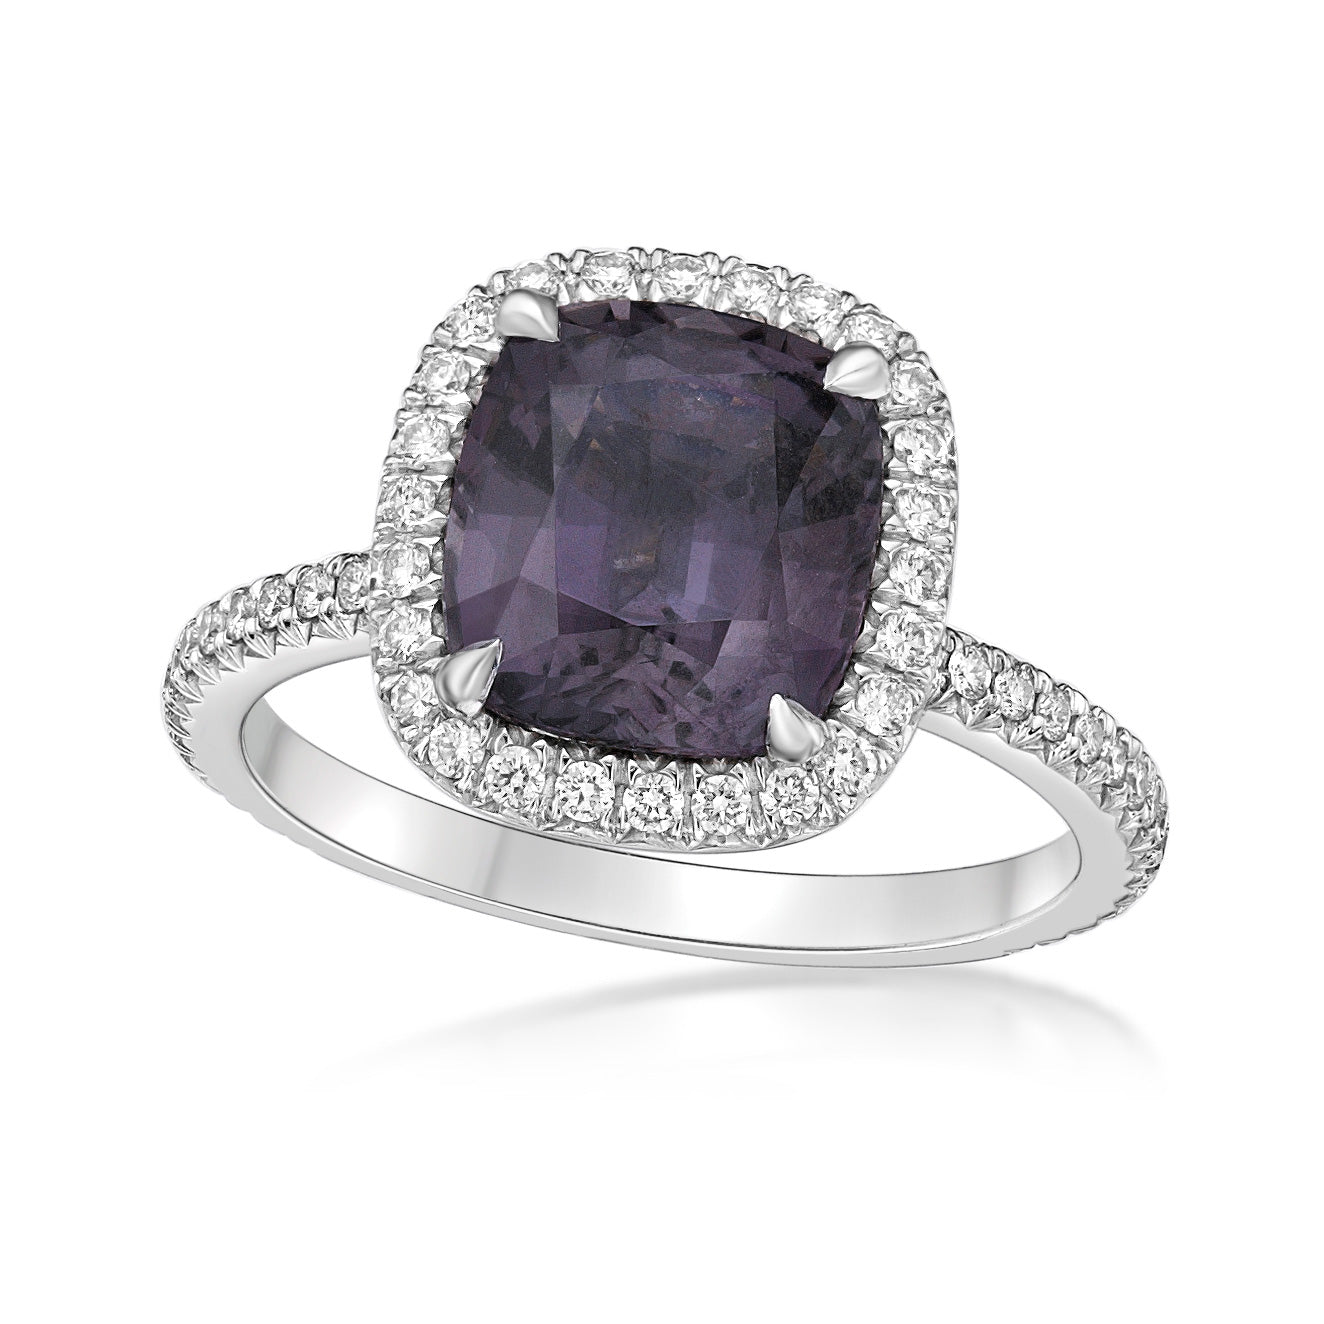 3.75ct Cushion-cut Purplish Grey Spinel set with four nail claws in a handmade 18K White Gold wall-set diamond halo setting